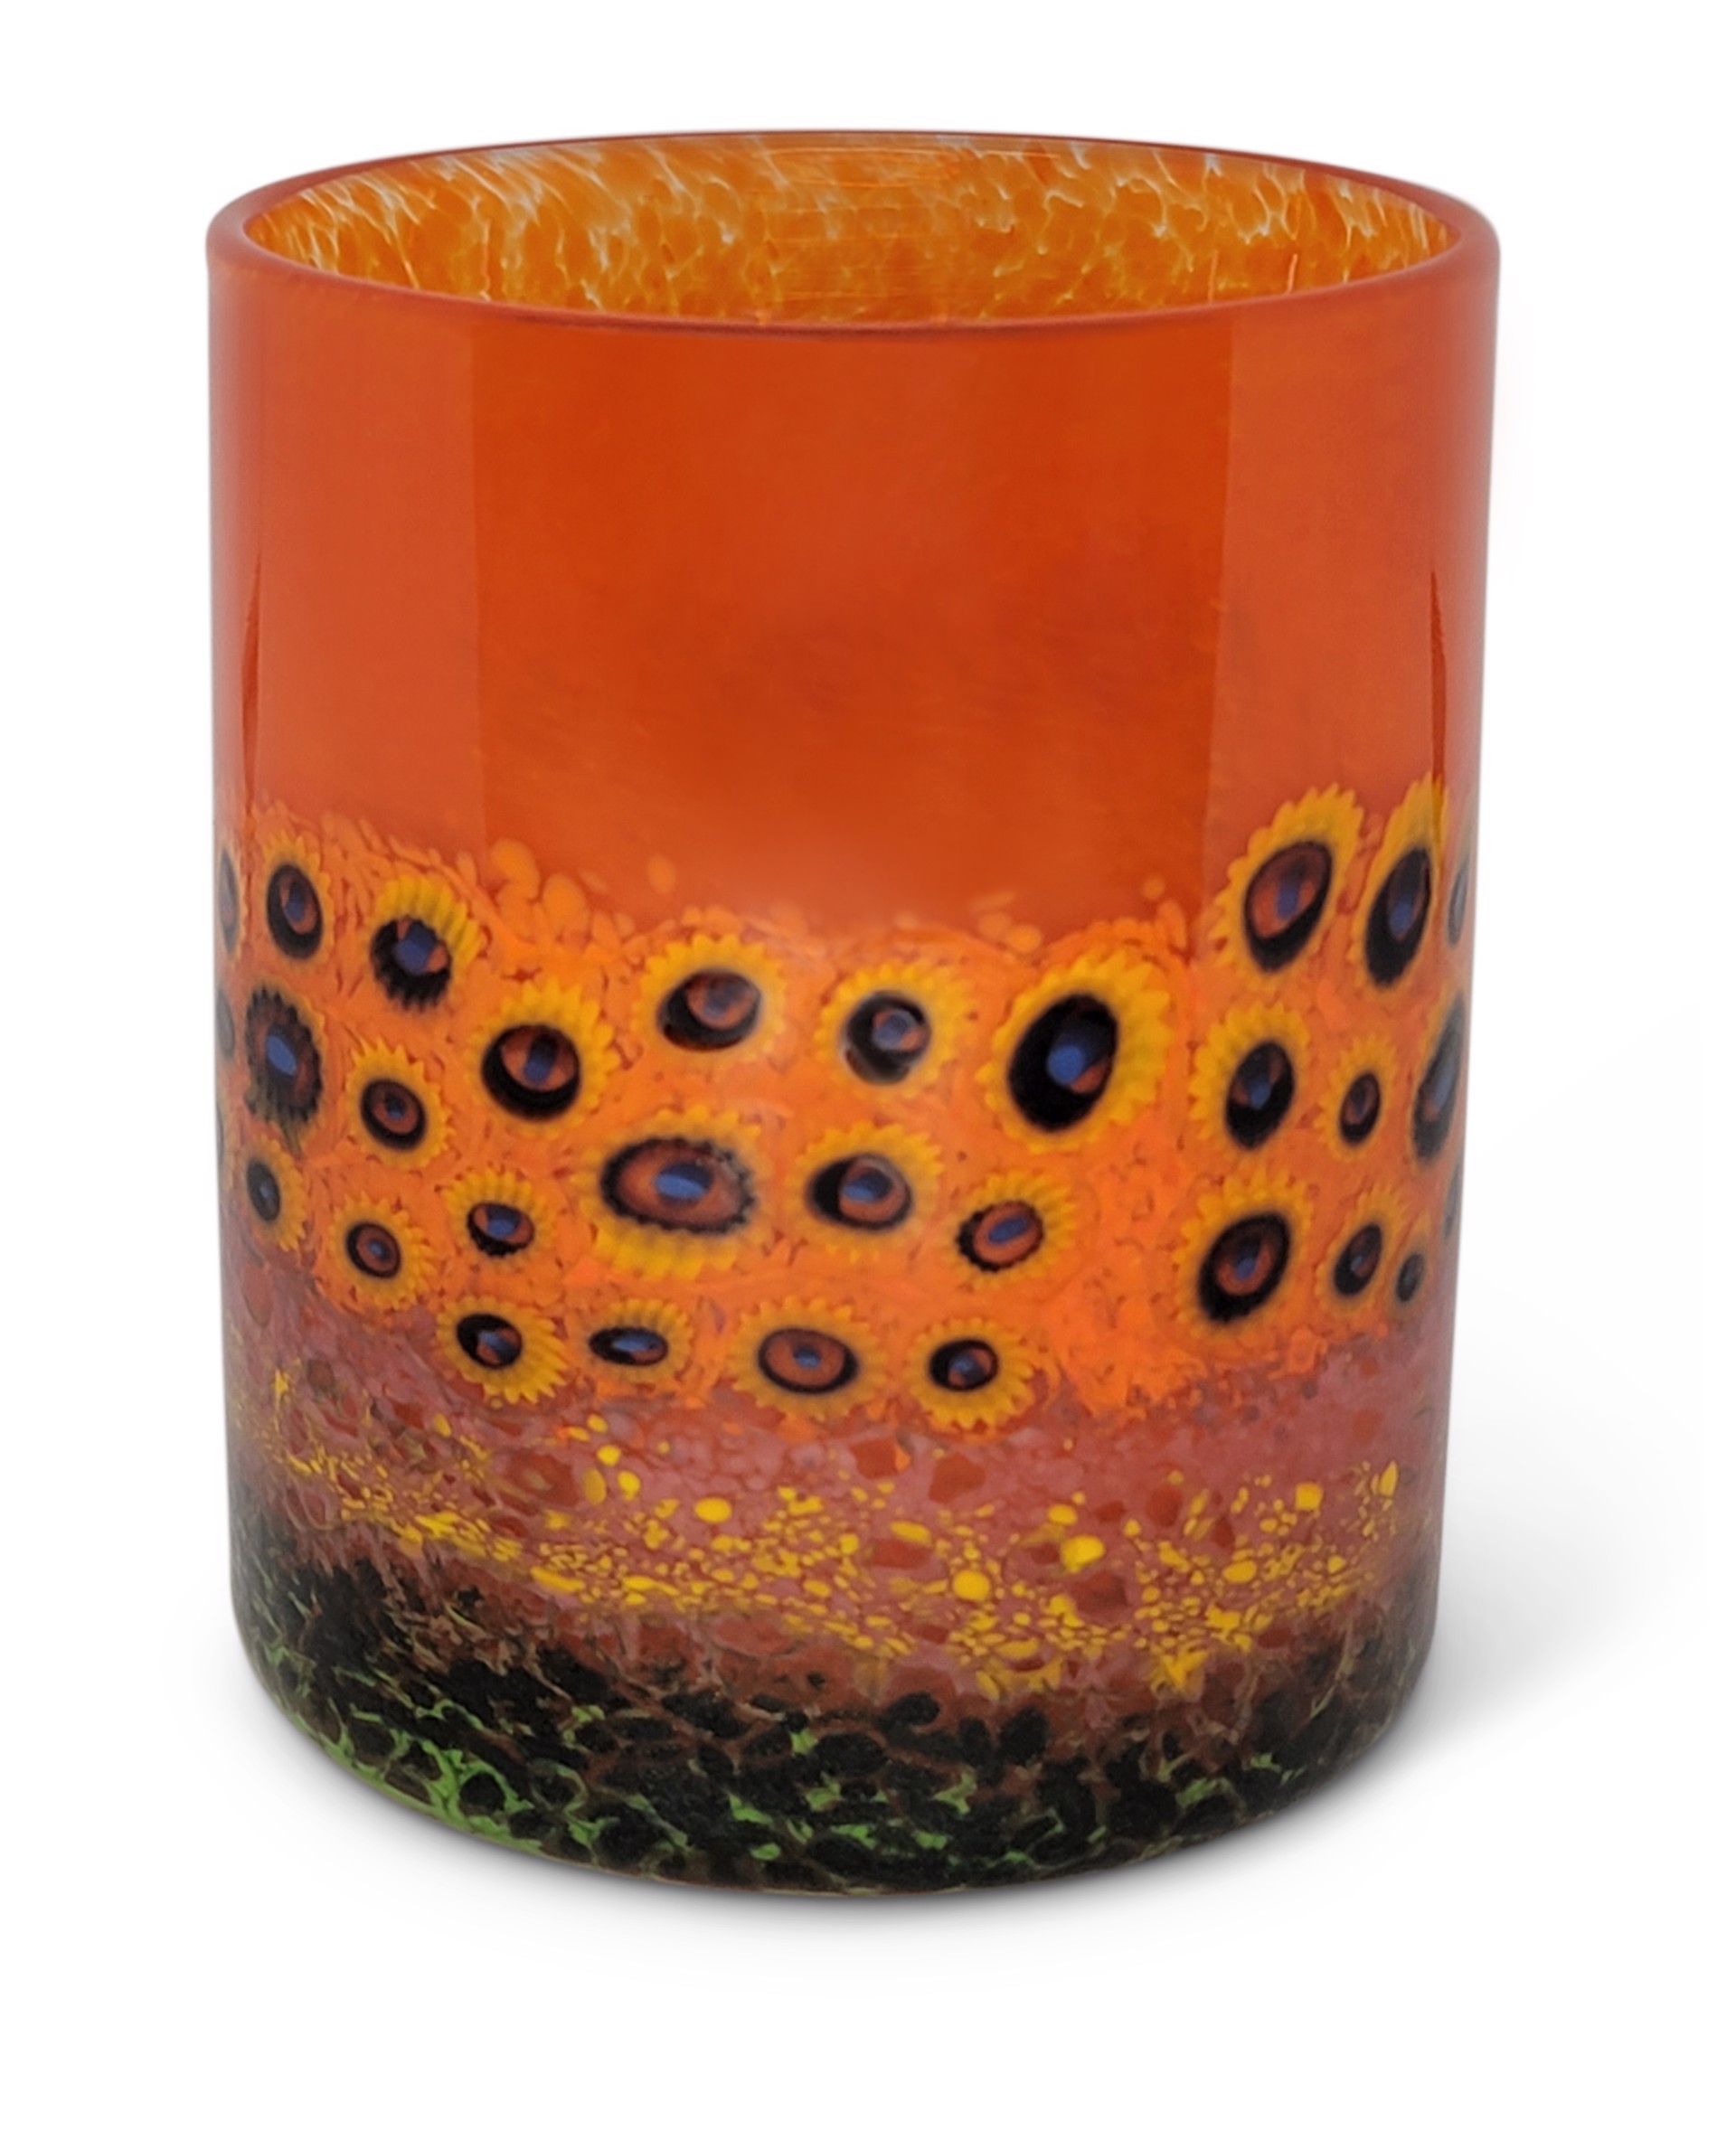 Orange Murrini Sunflower Tumbler ~ Orange Hand-blown double old fashioned drinking glasses with iridescent swirls and yellow floral millefiori. Dishwasher safe. Blown thick and heavy for everyday use. Patterns vary. by Ken Hanson & Ingrid Hanson